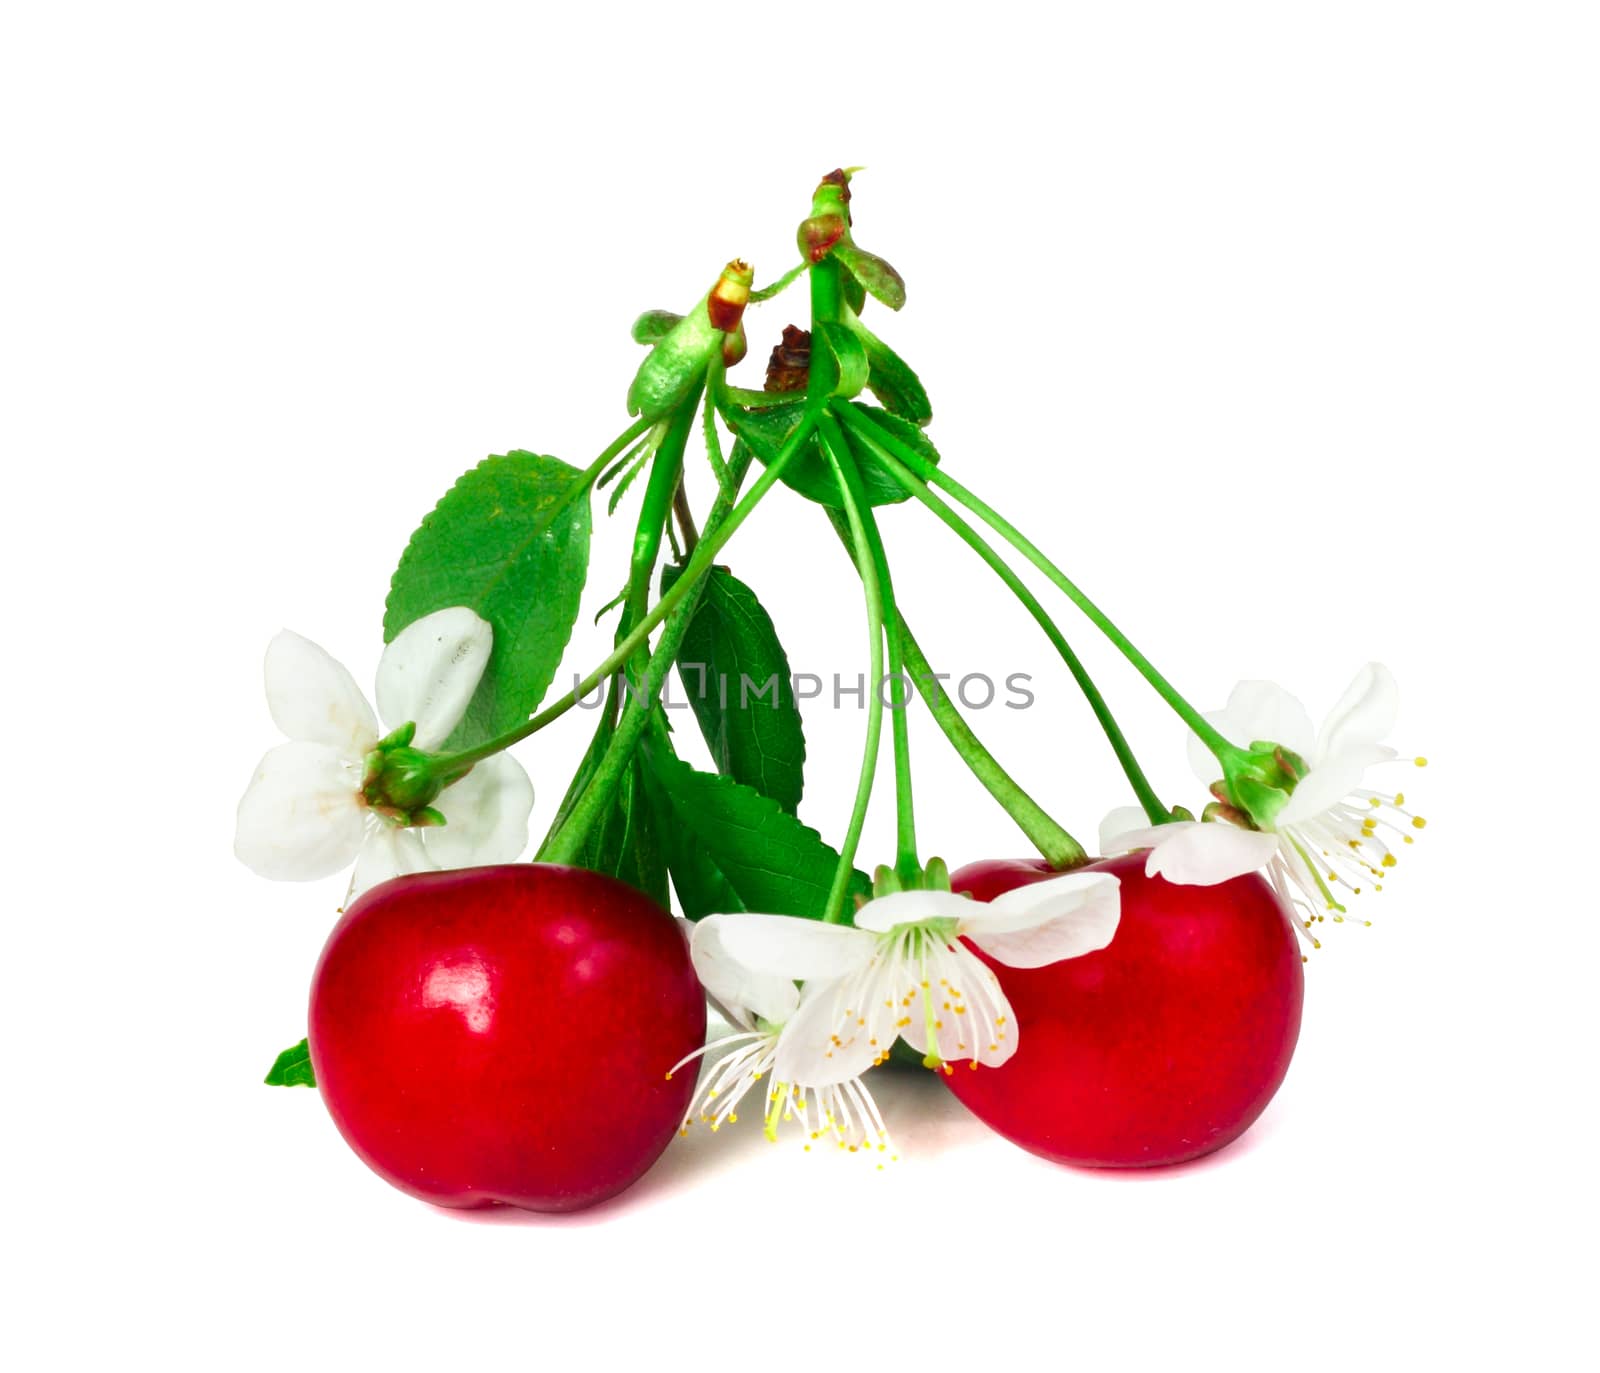 Cherry with leafs and flowers isolated on white background